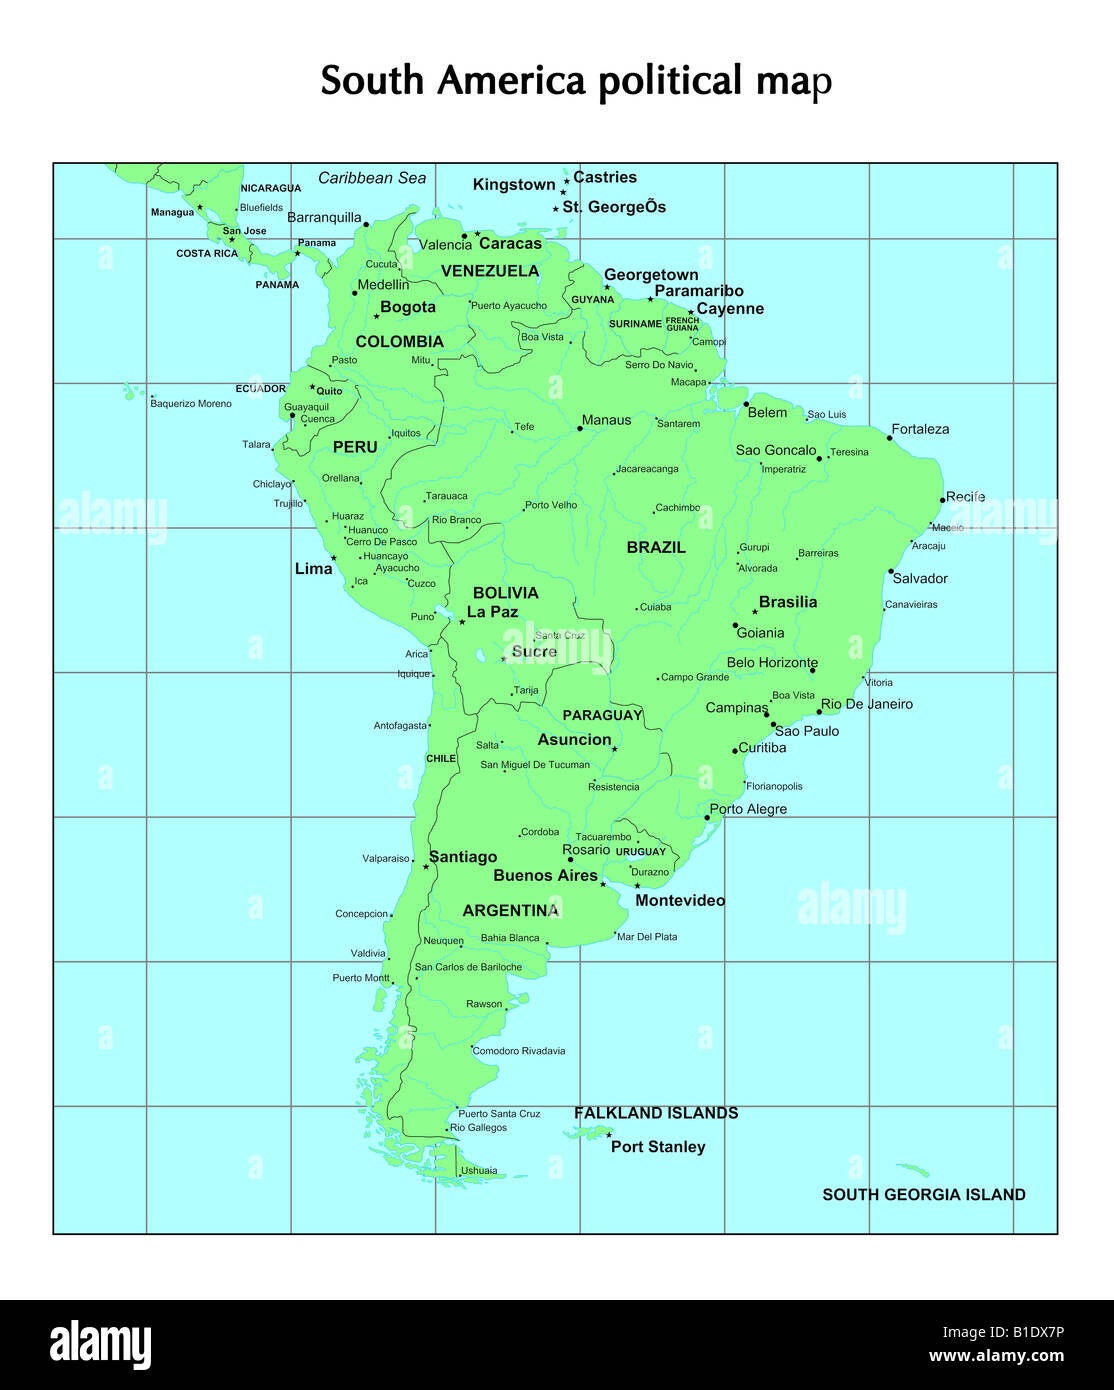 South America political map Stock Photo